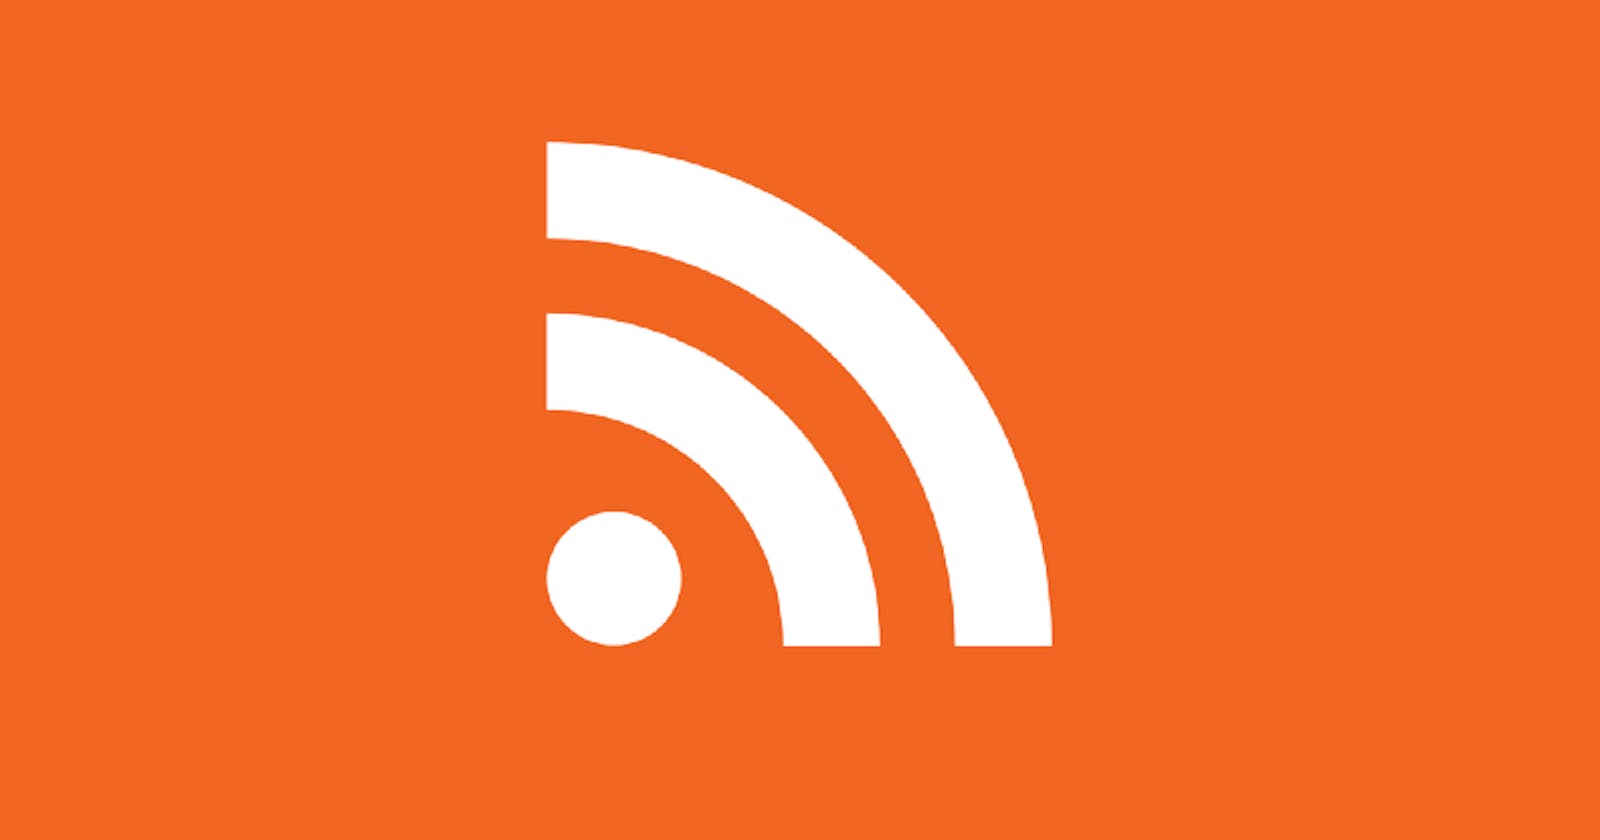 How to Build an RSS Feed